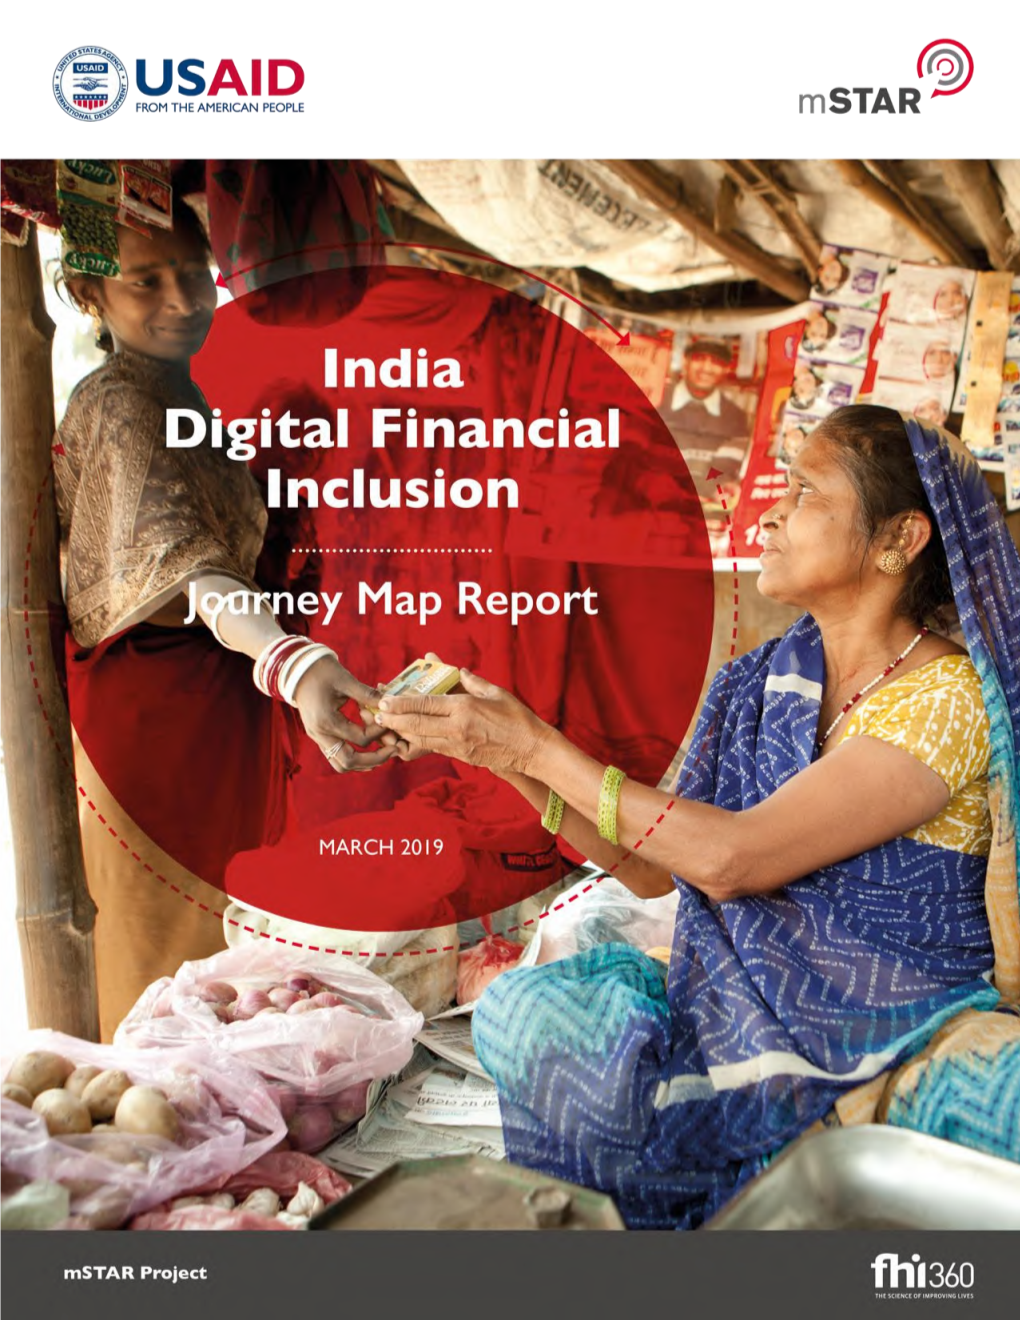 India Digital Financial Inclusion | Journey Map Report | Mstar Project